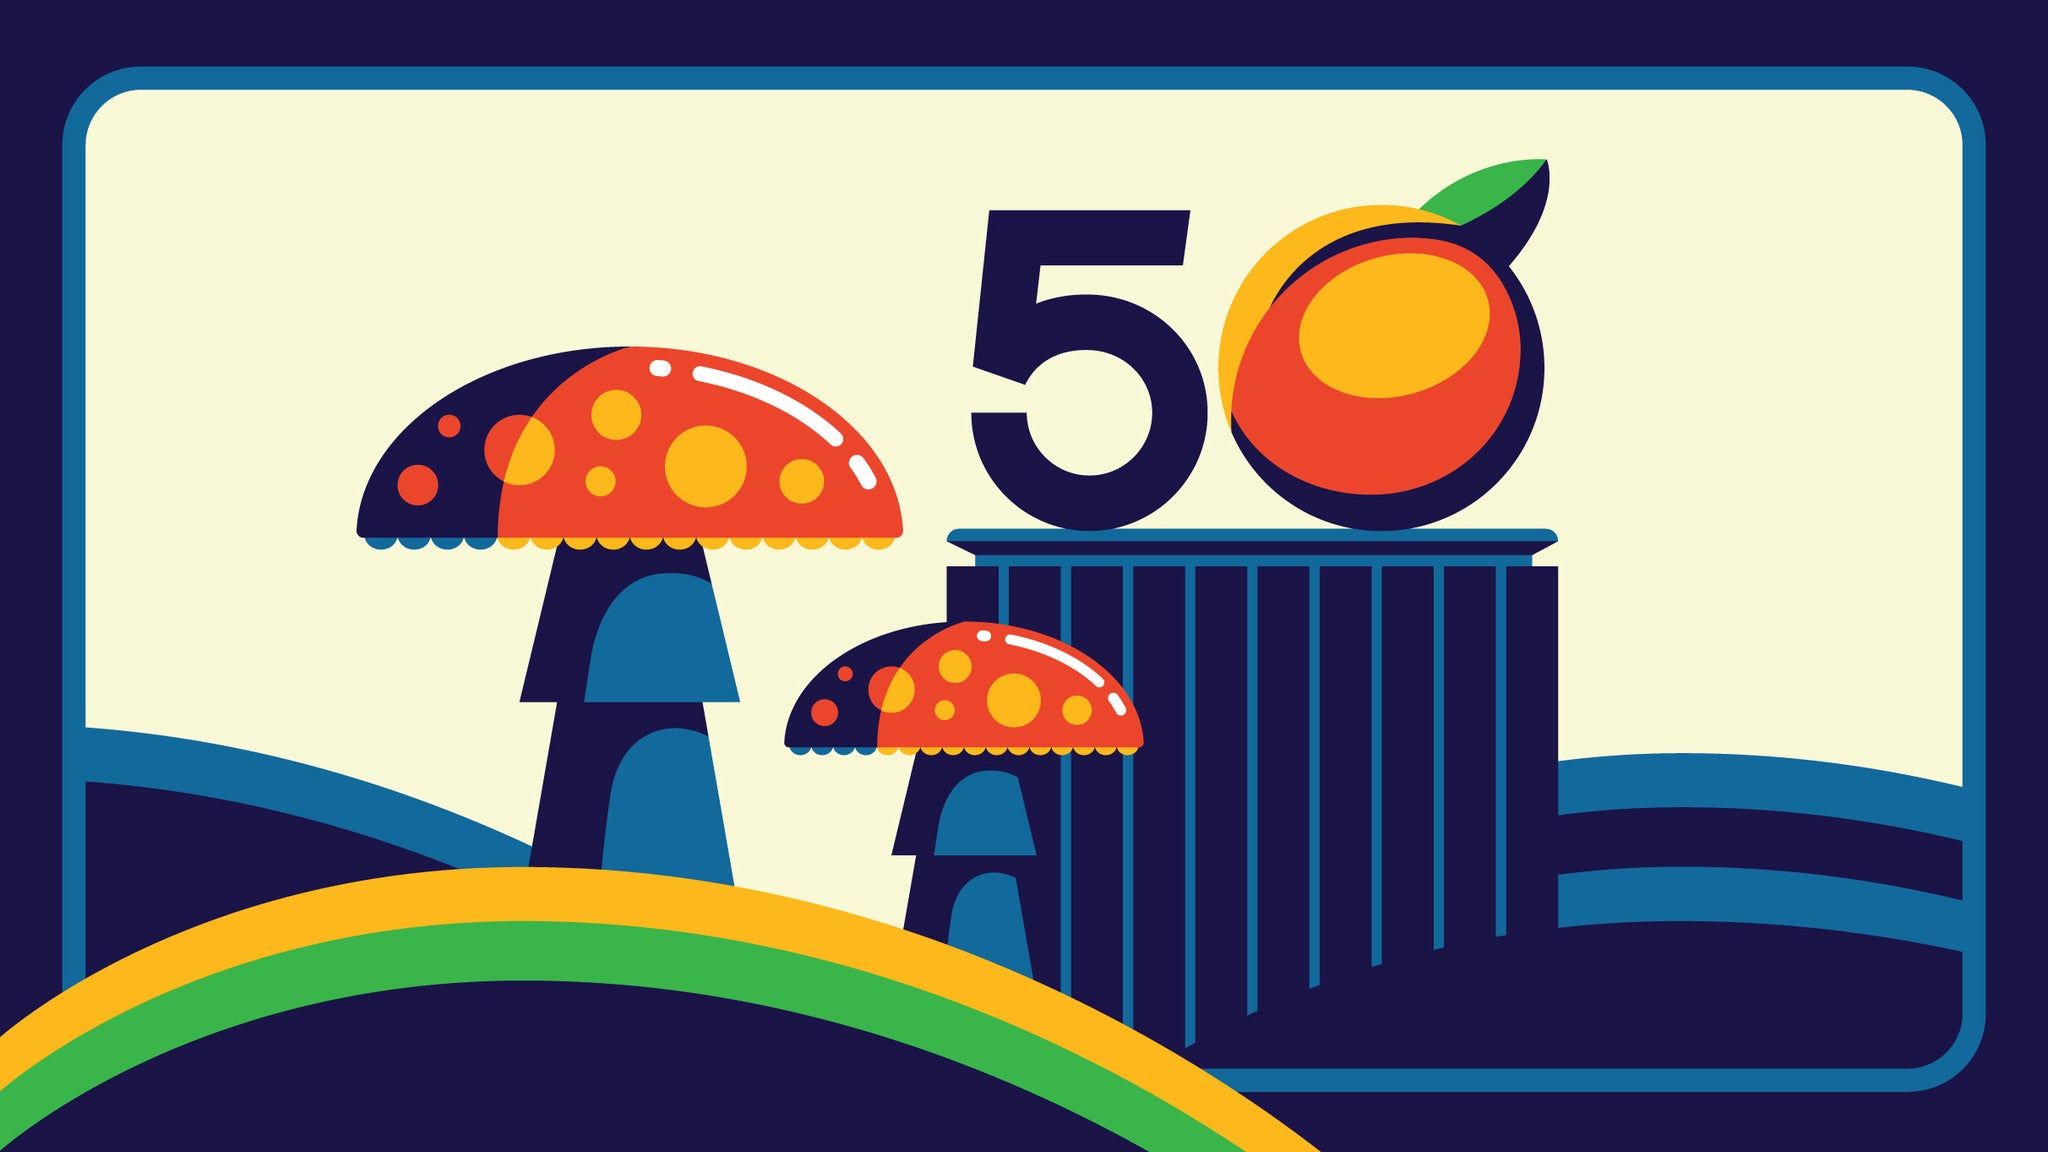 The Brothers - Celebrating 50 Years of The Allman Brothers Band in New York promo photo for American Express® Card Member presale offer code